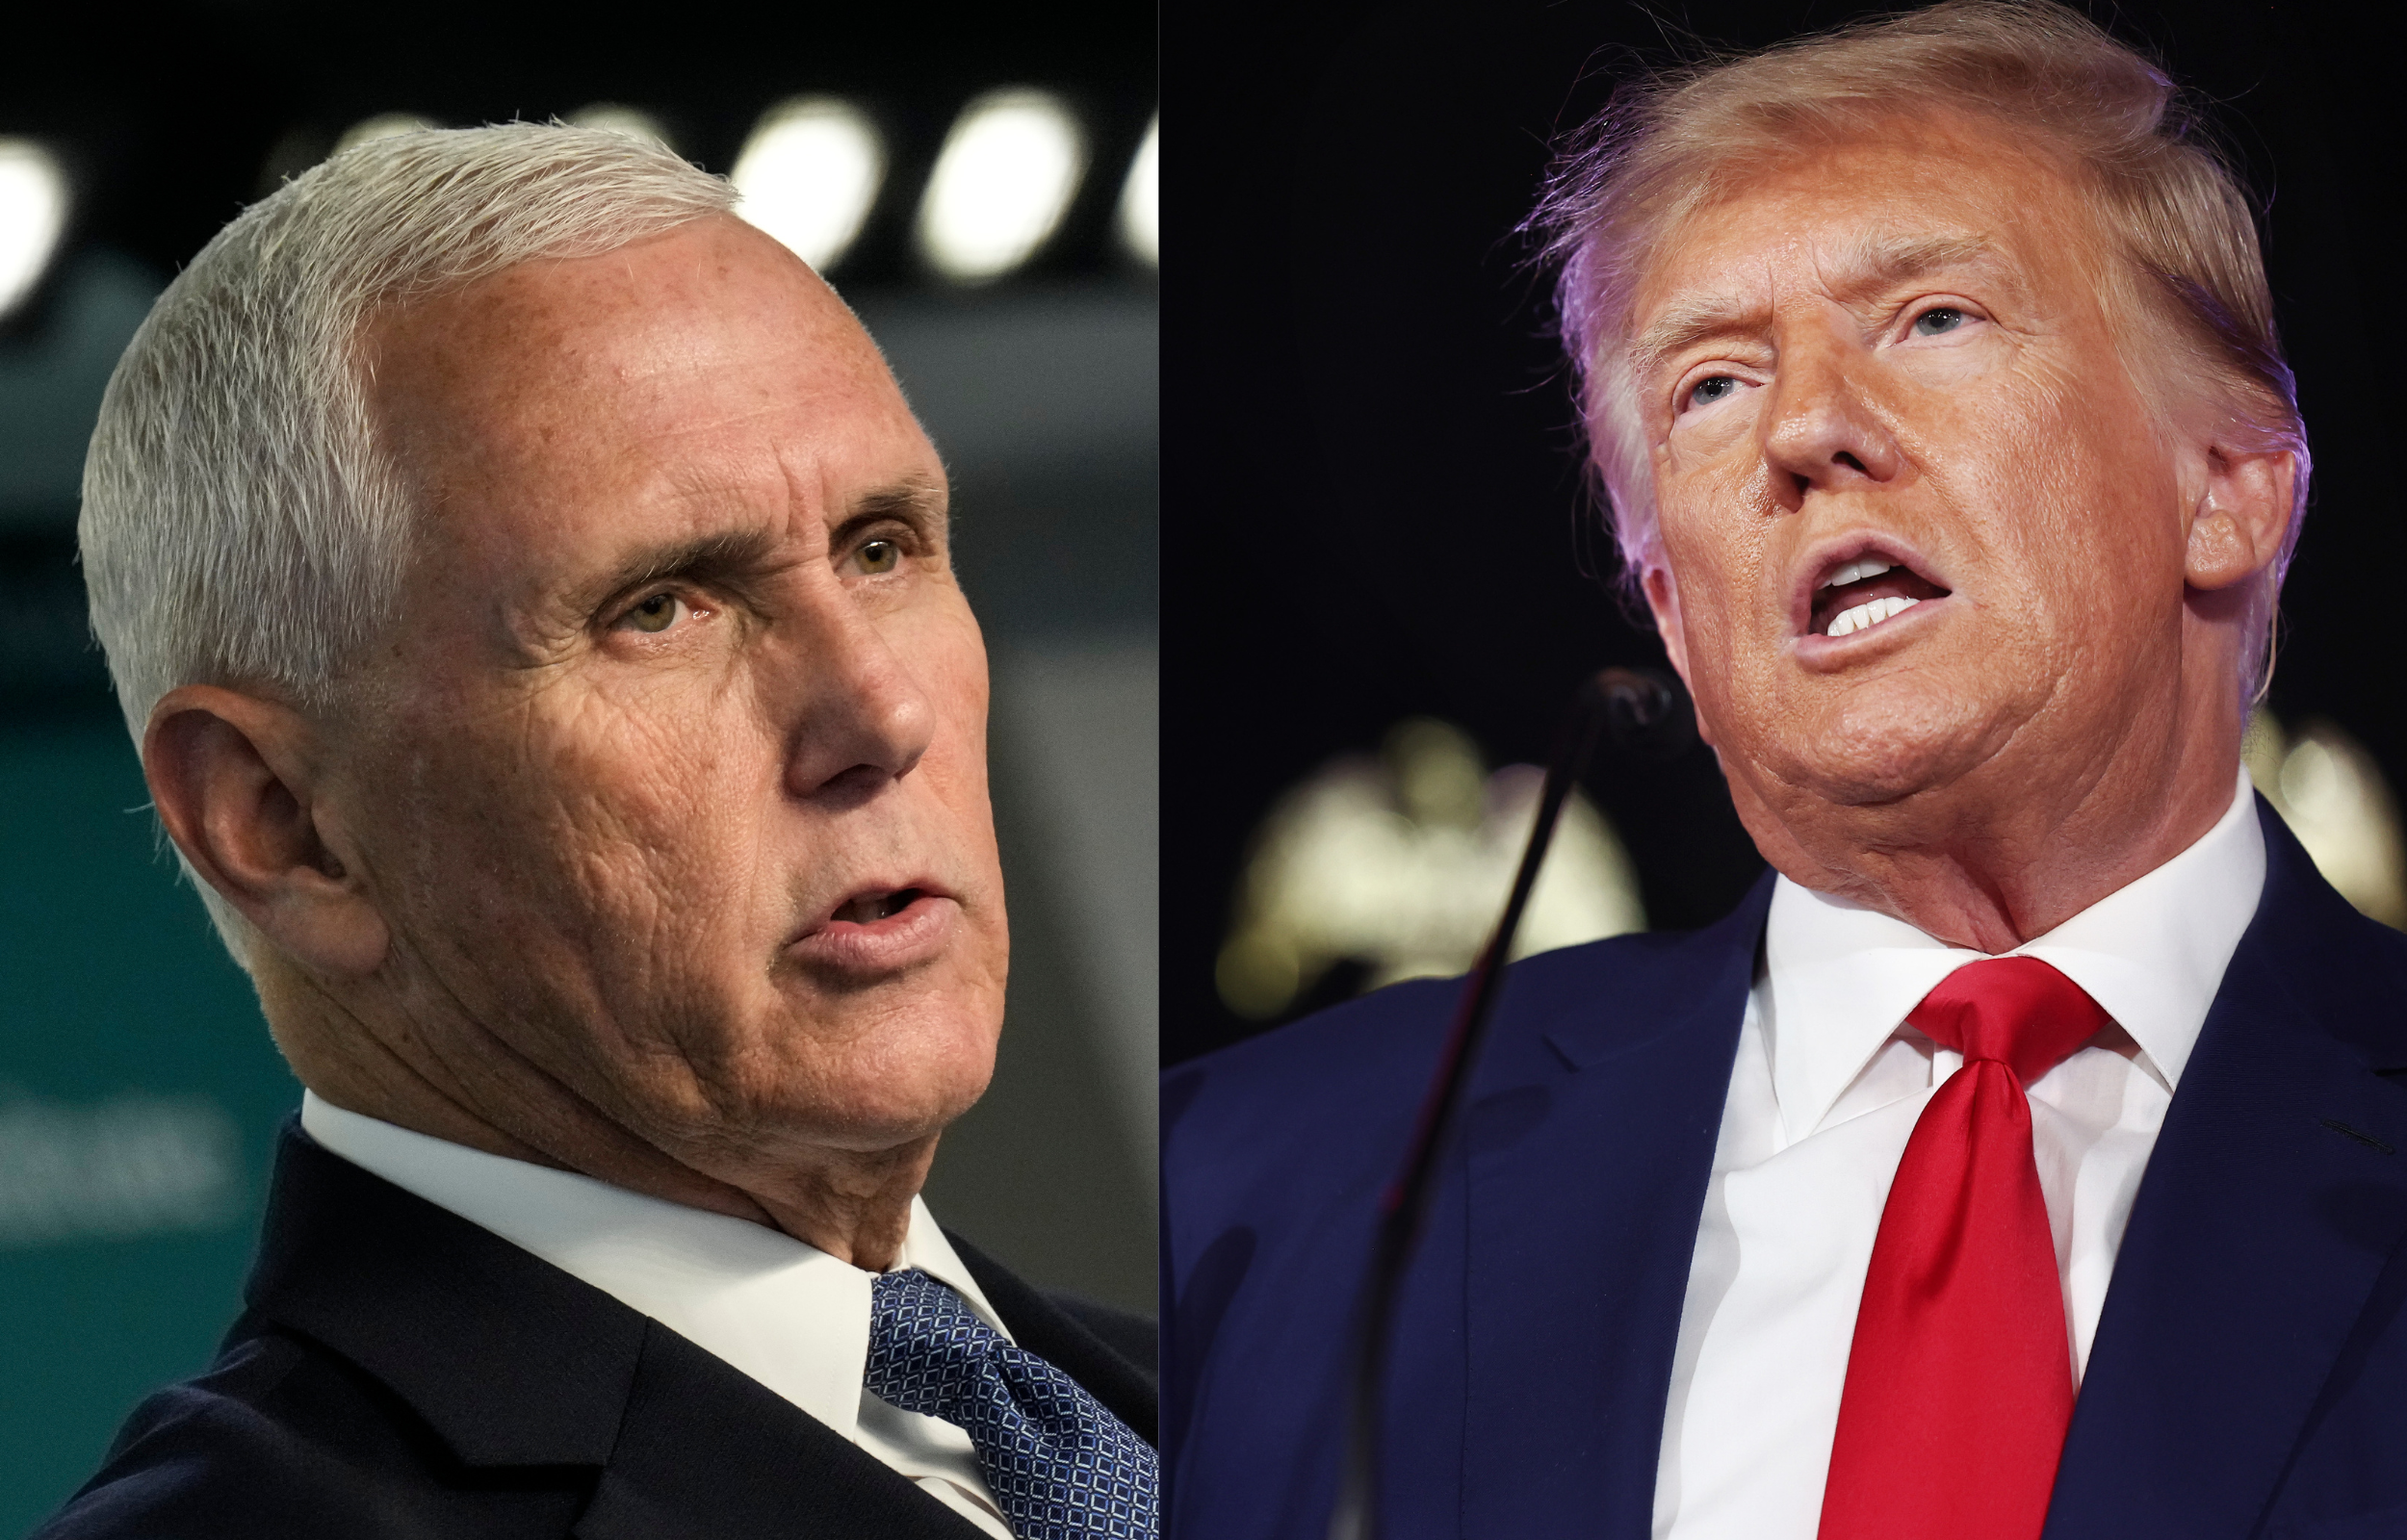 “Almost a certainty” Mike Pence flips on Donald Trump, legal analyst warns